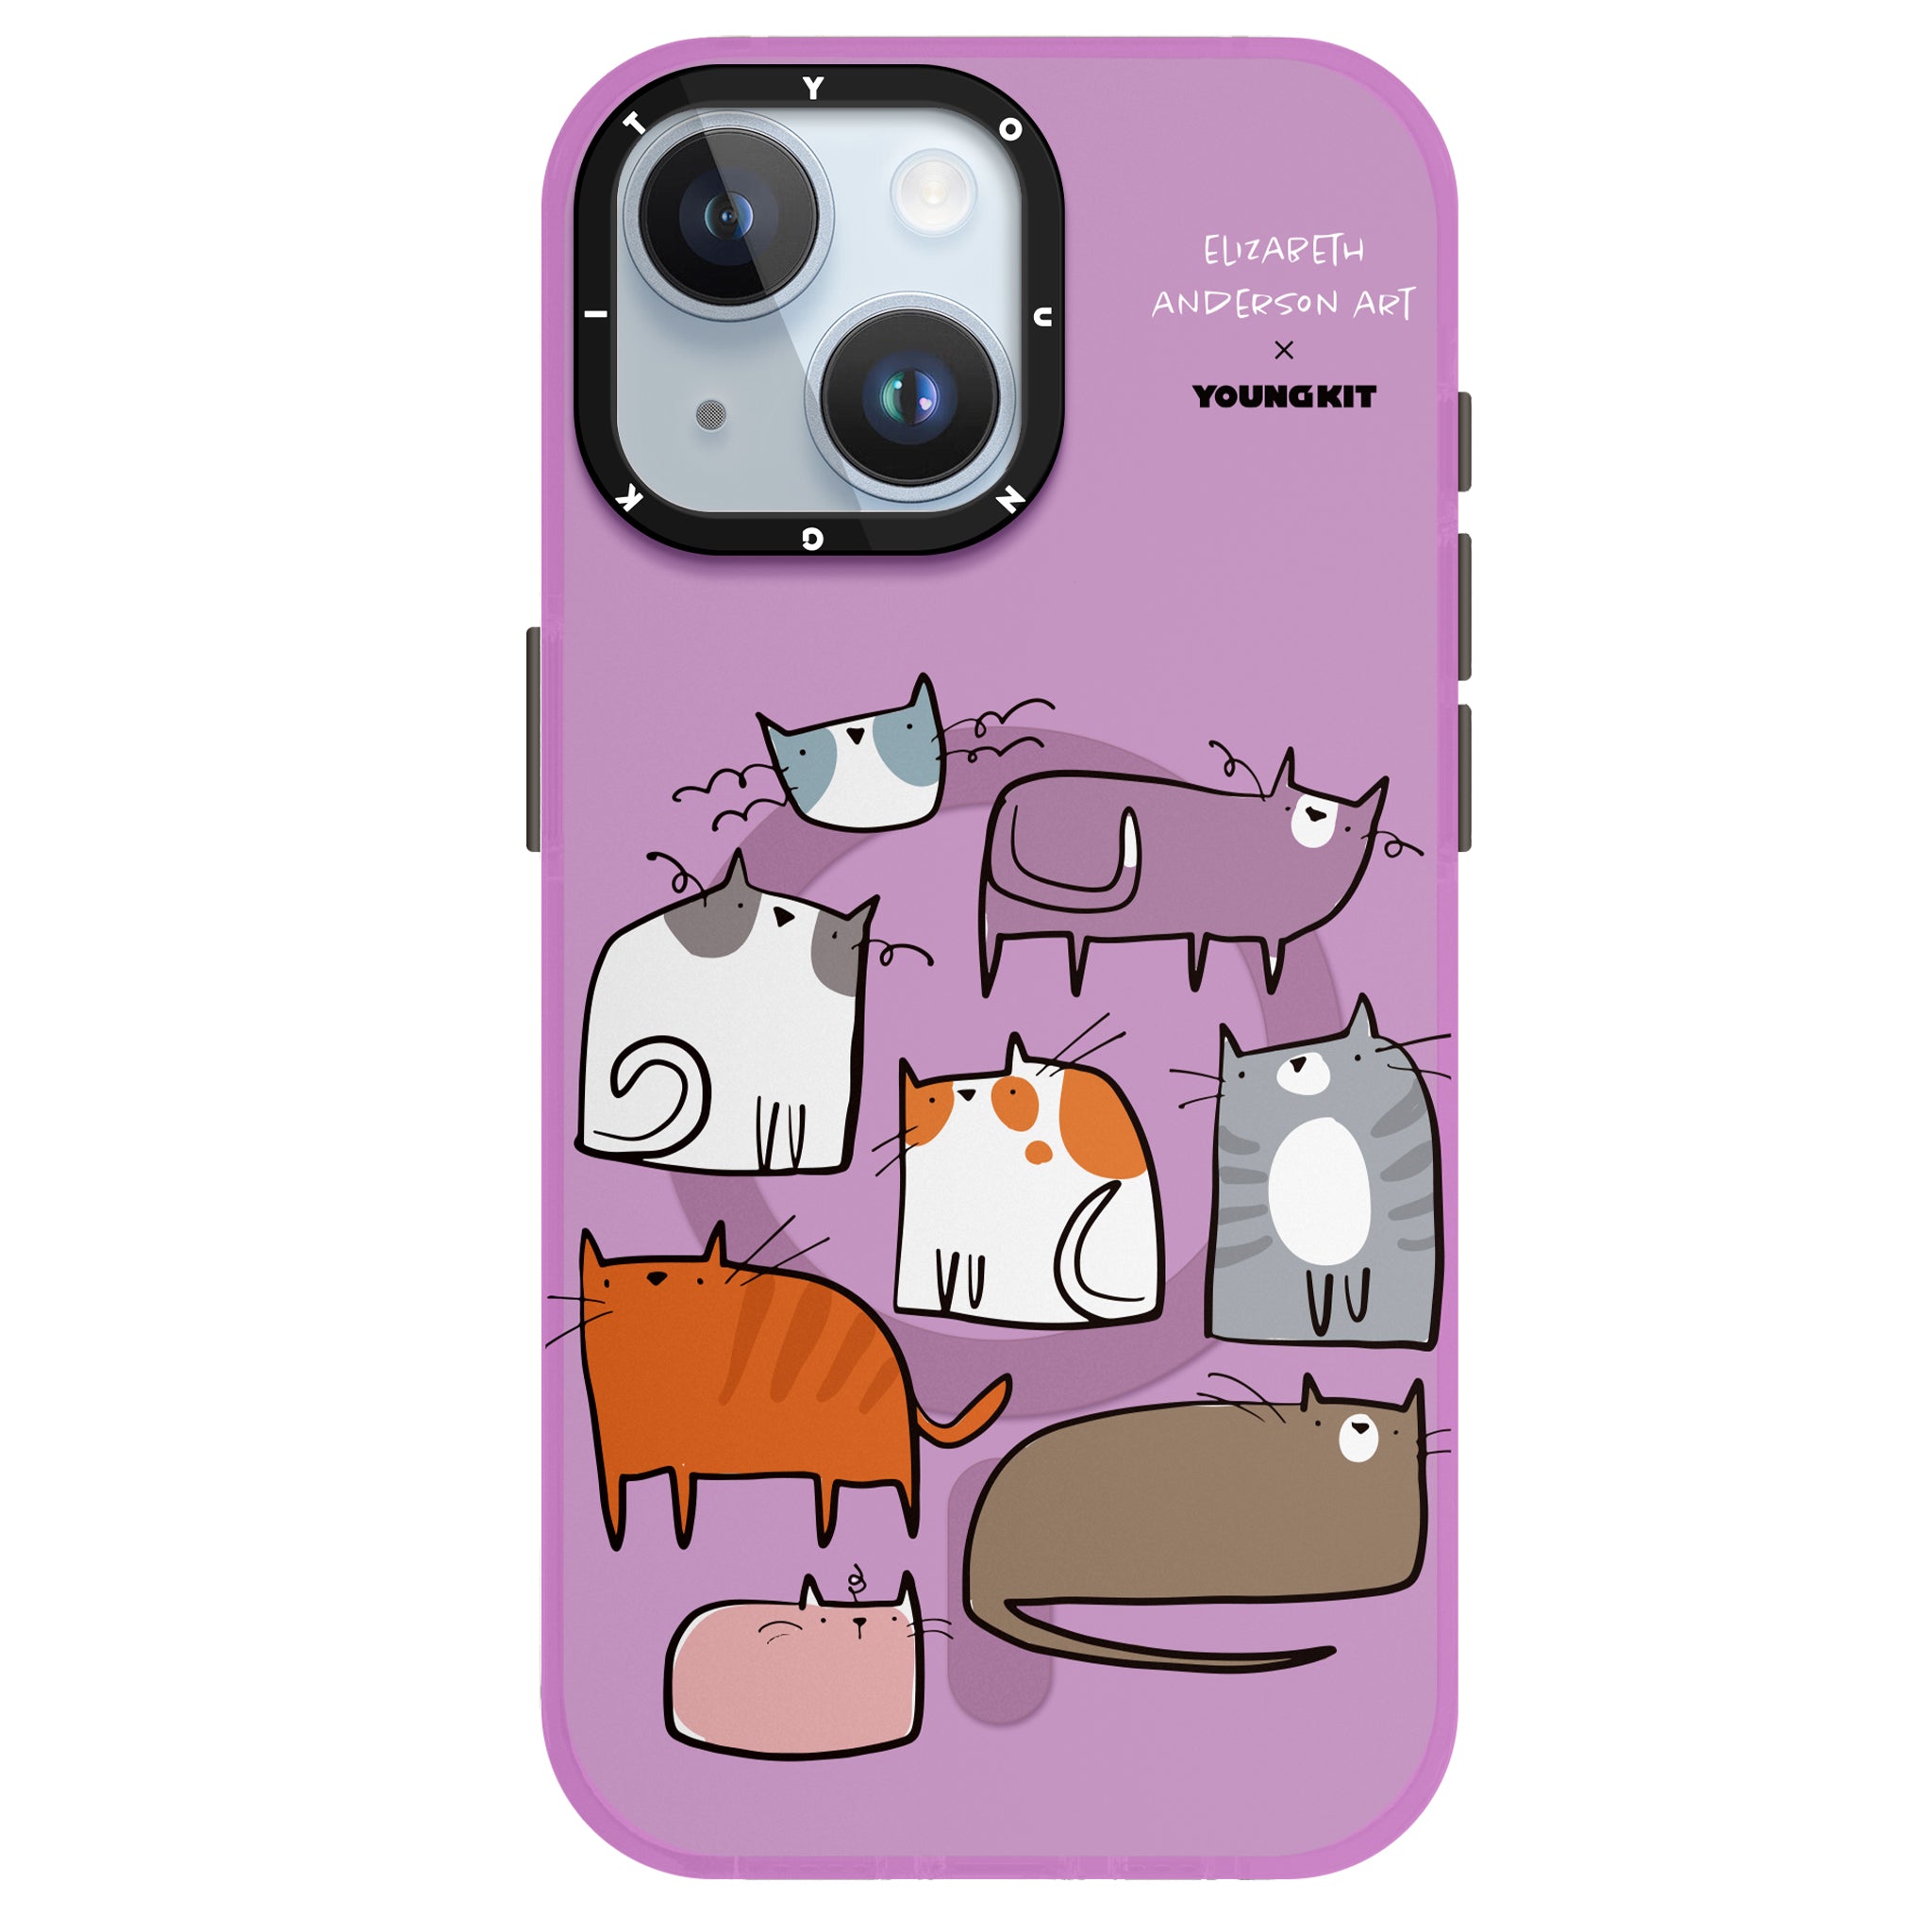 YOUNGKIT X Elizabeth Anderson Art MagSafe iPhone15 Case